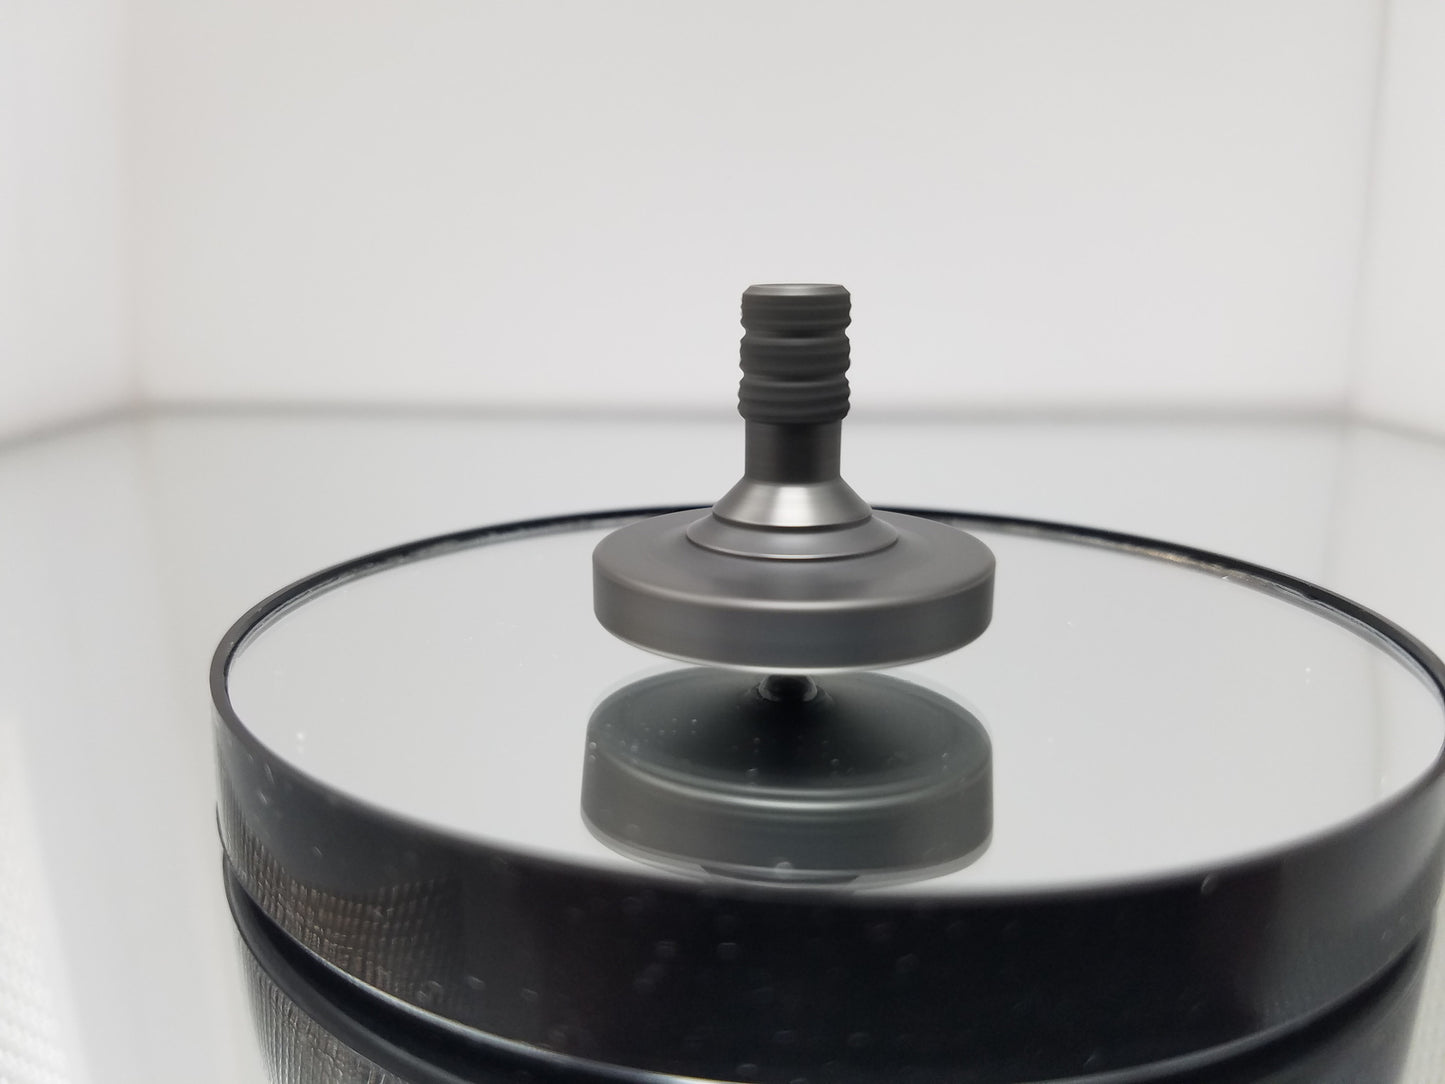 Stainless Steel Spinning Top Blacked Out with a Satin Finish - Kemner Design